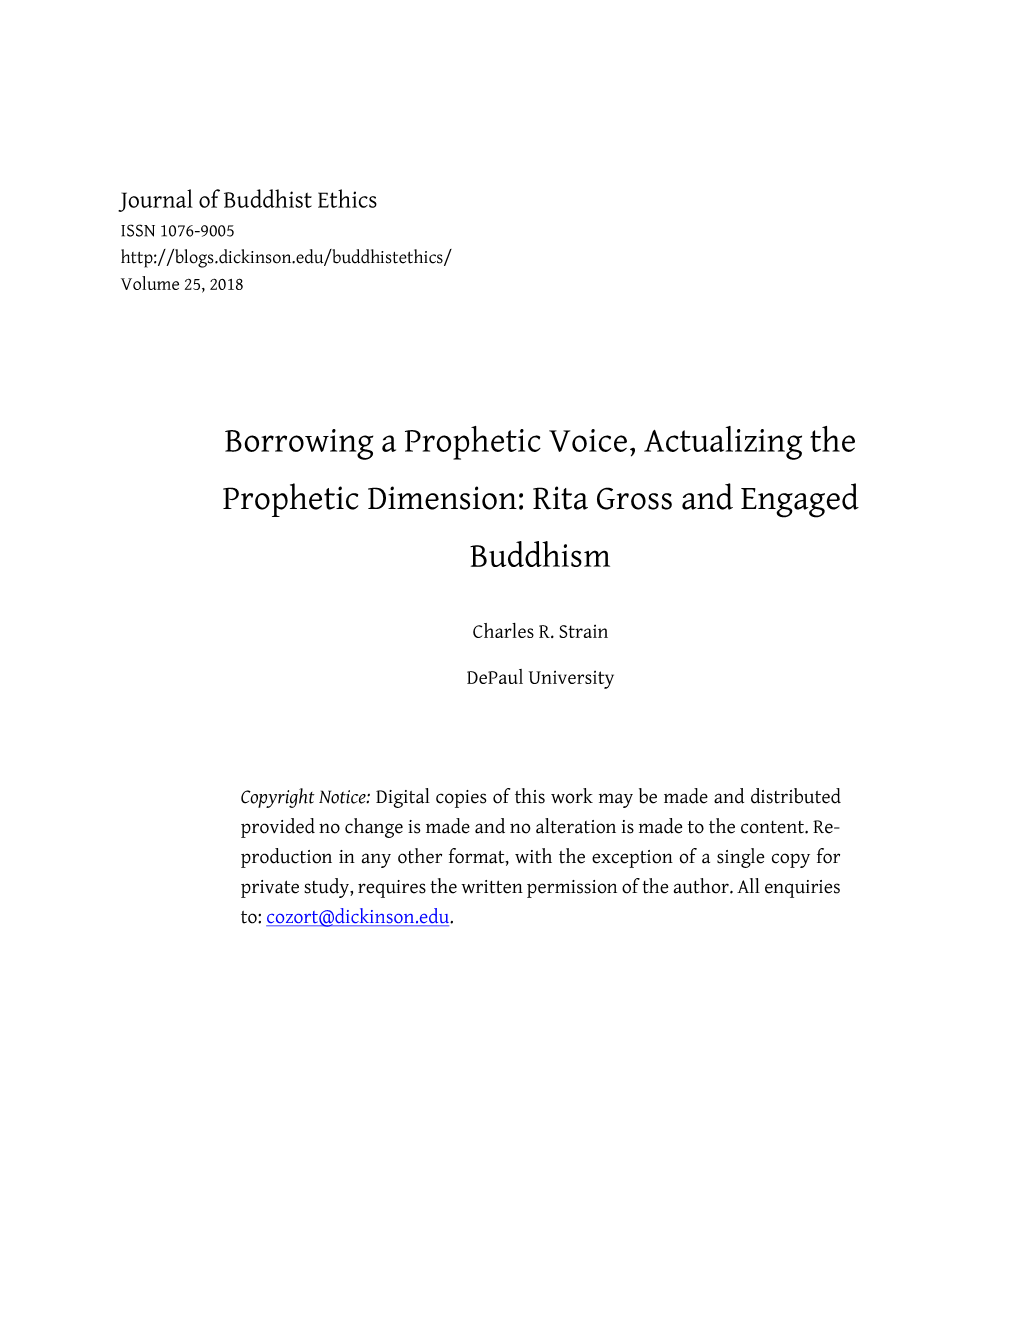 Borrowing a Prophetic Voice, Actualizing the Prophetic Dimension: Rita Gross and Engaged Buddhism